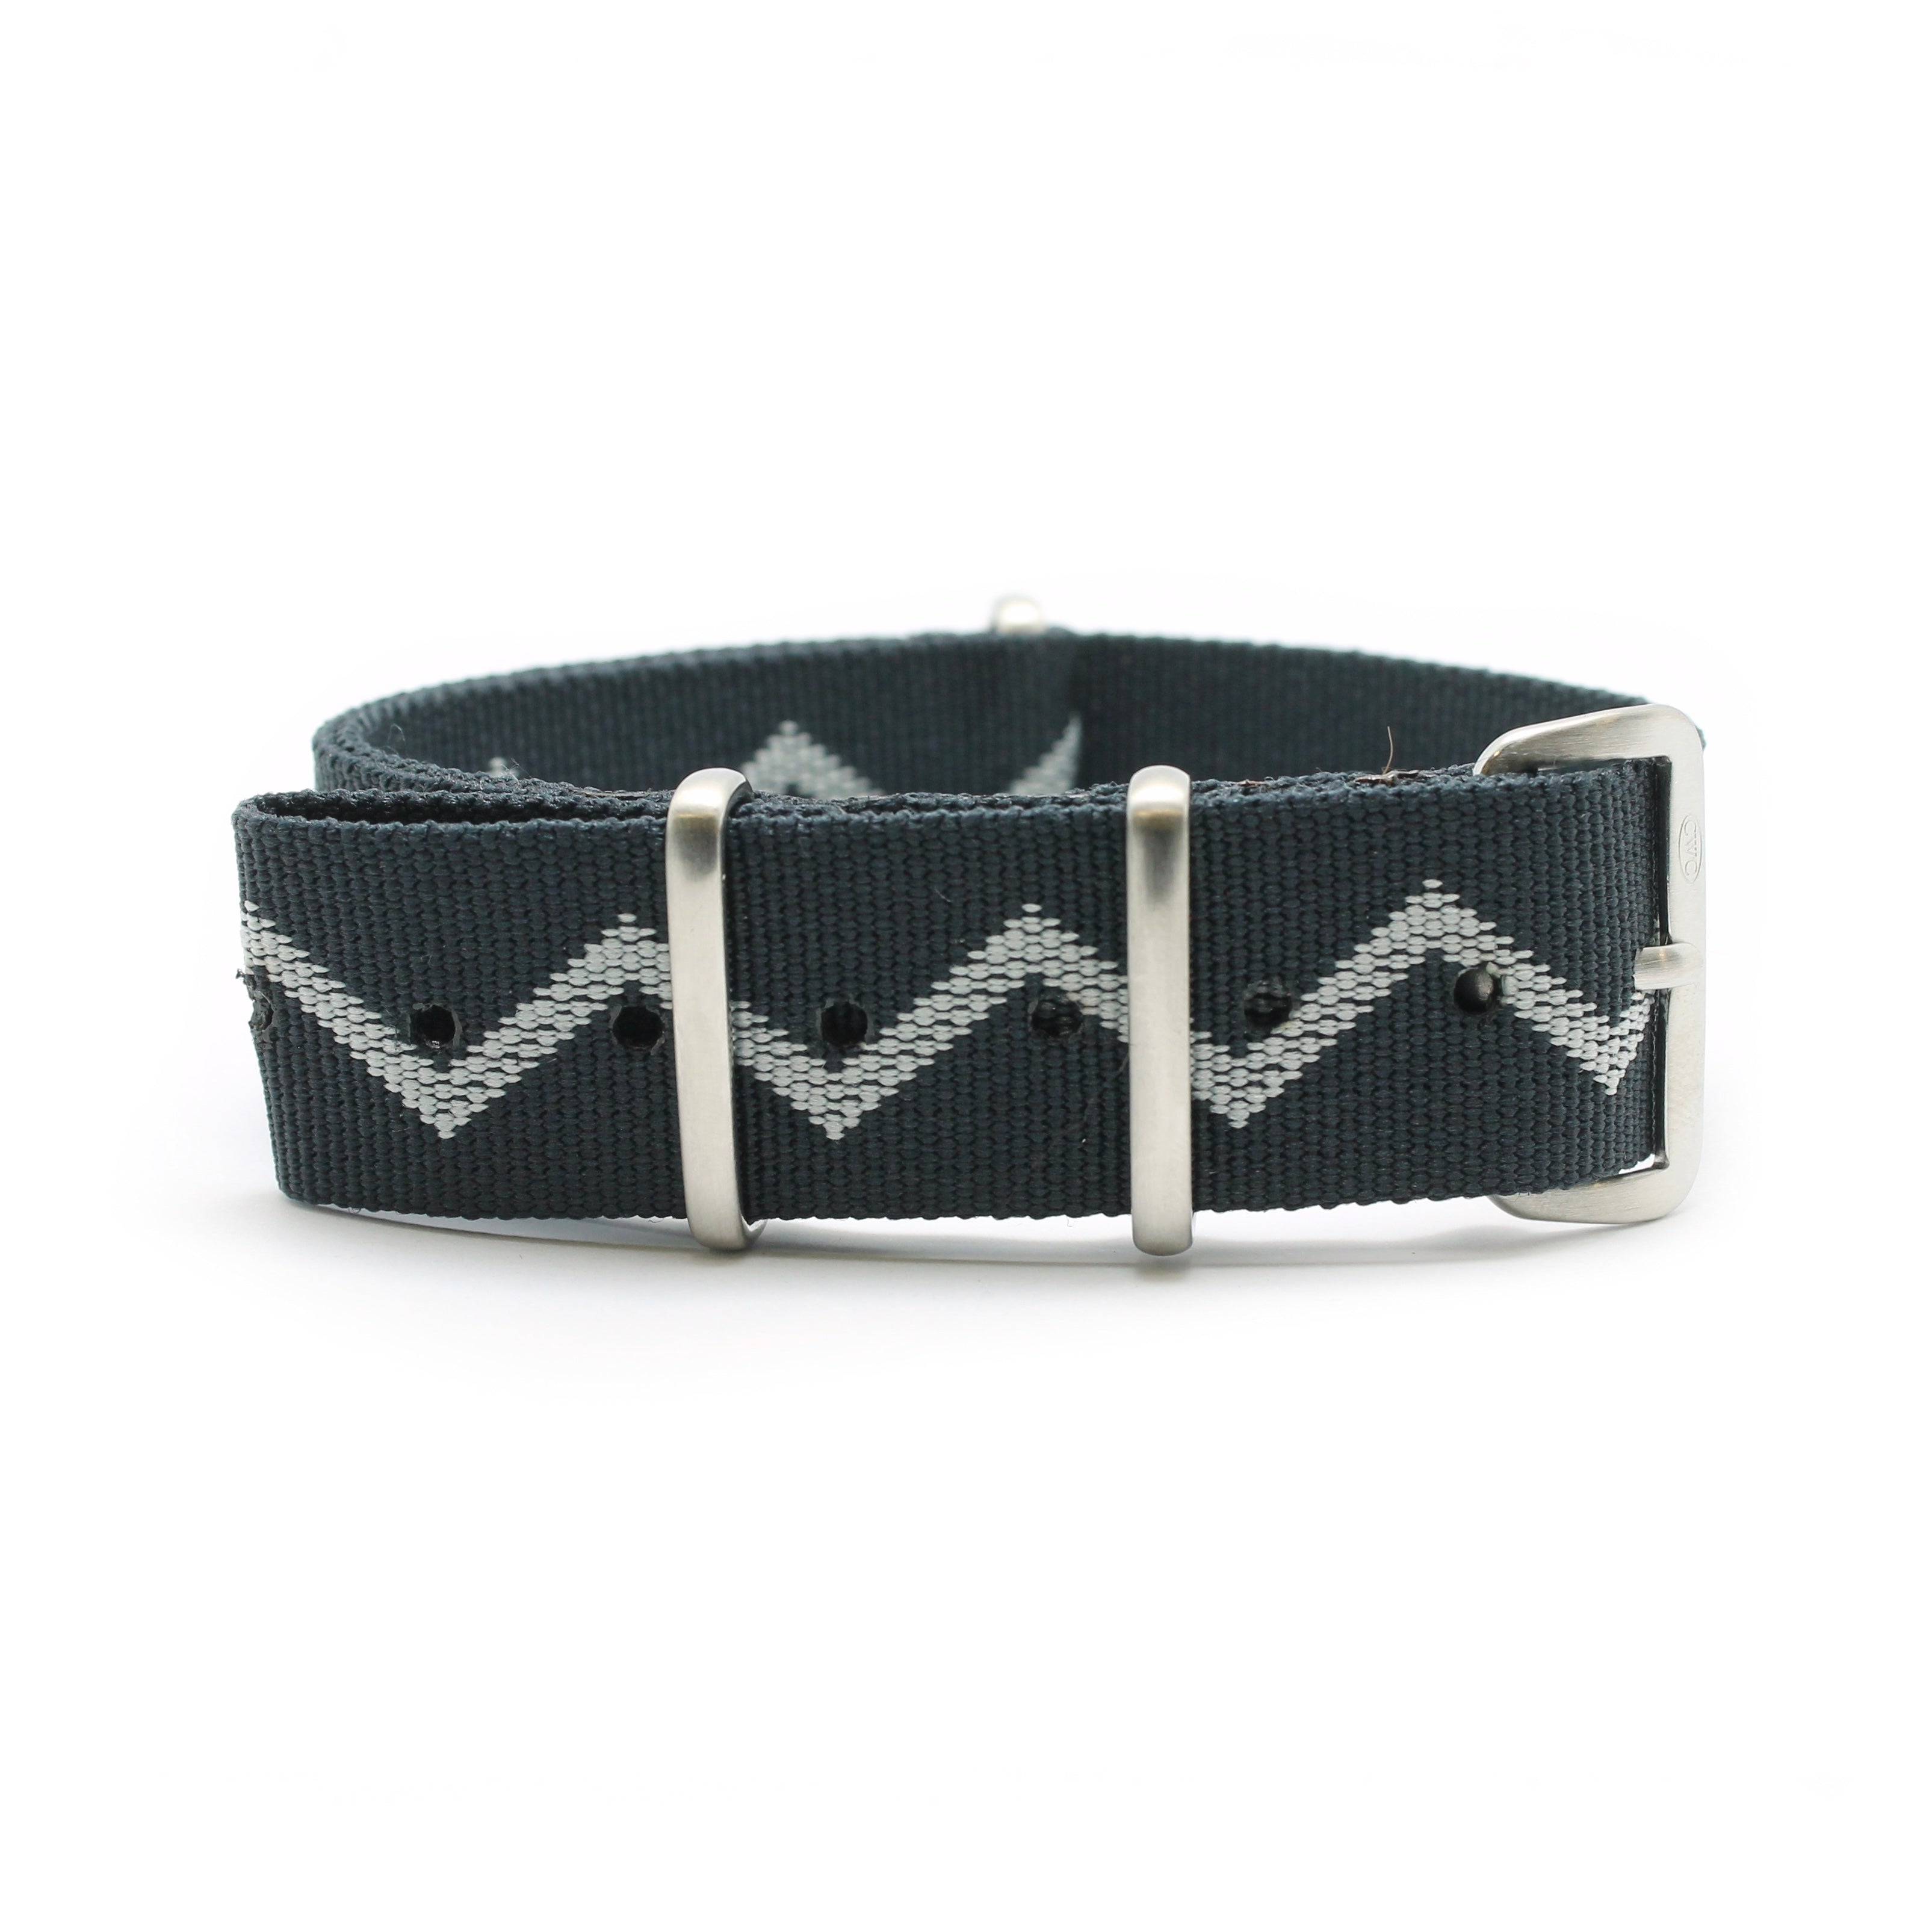 CWC NATO ZIGZAG STRAP - NAVY WITH LIGHT BLUE